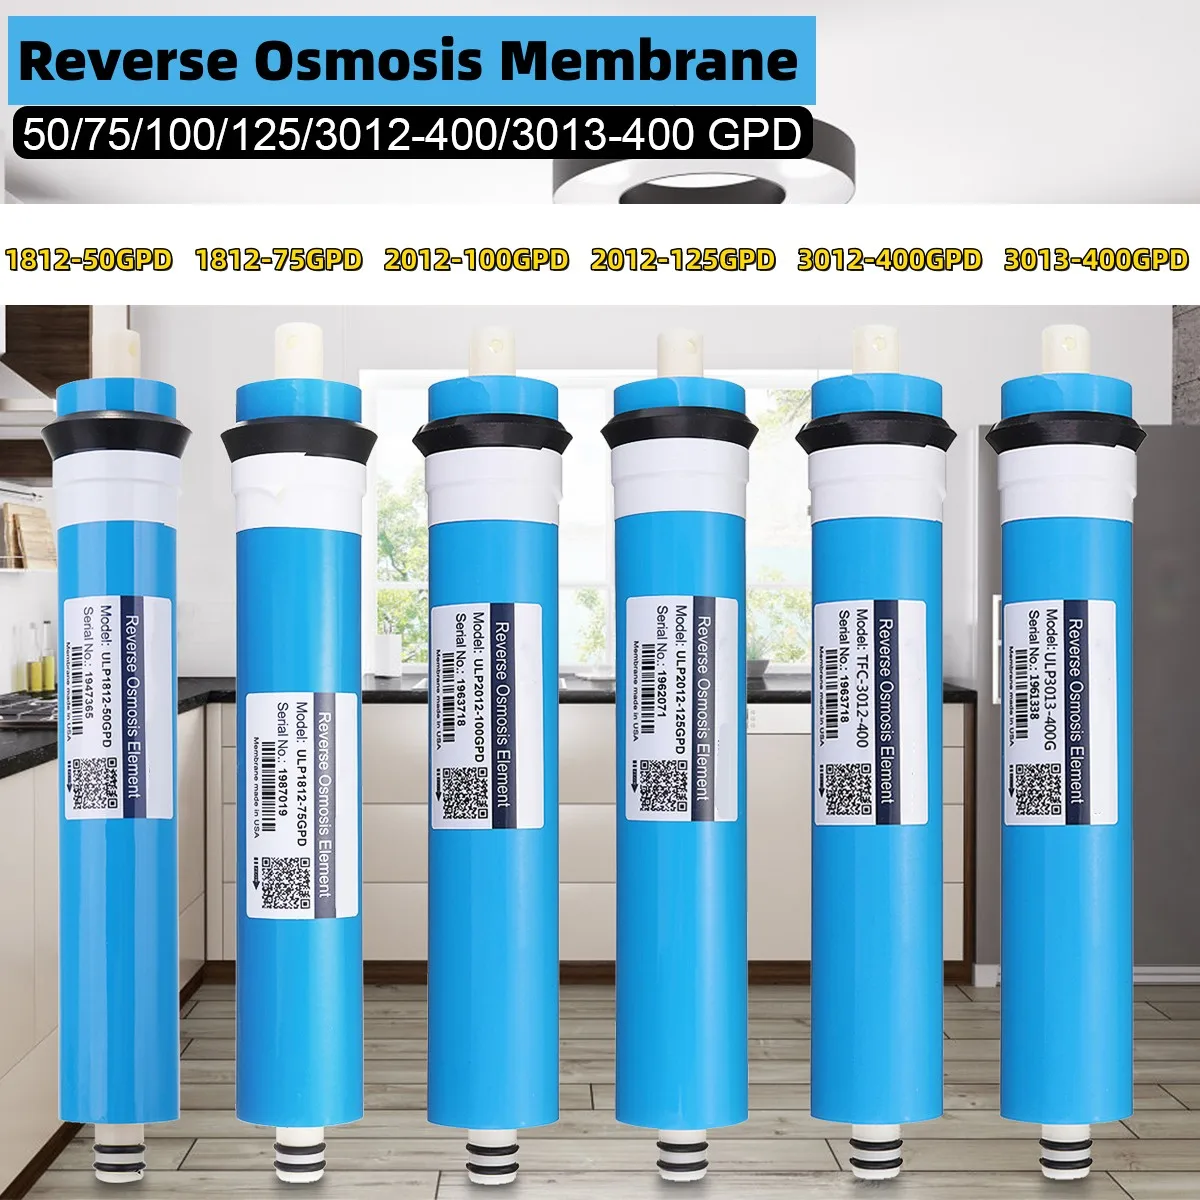 50/75/100/125/400GPD Home Kitchen Reverse Osmosis RO Membrane Replacement Water System Filter Purifier Water Drinking Treatment